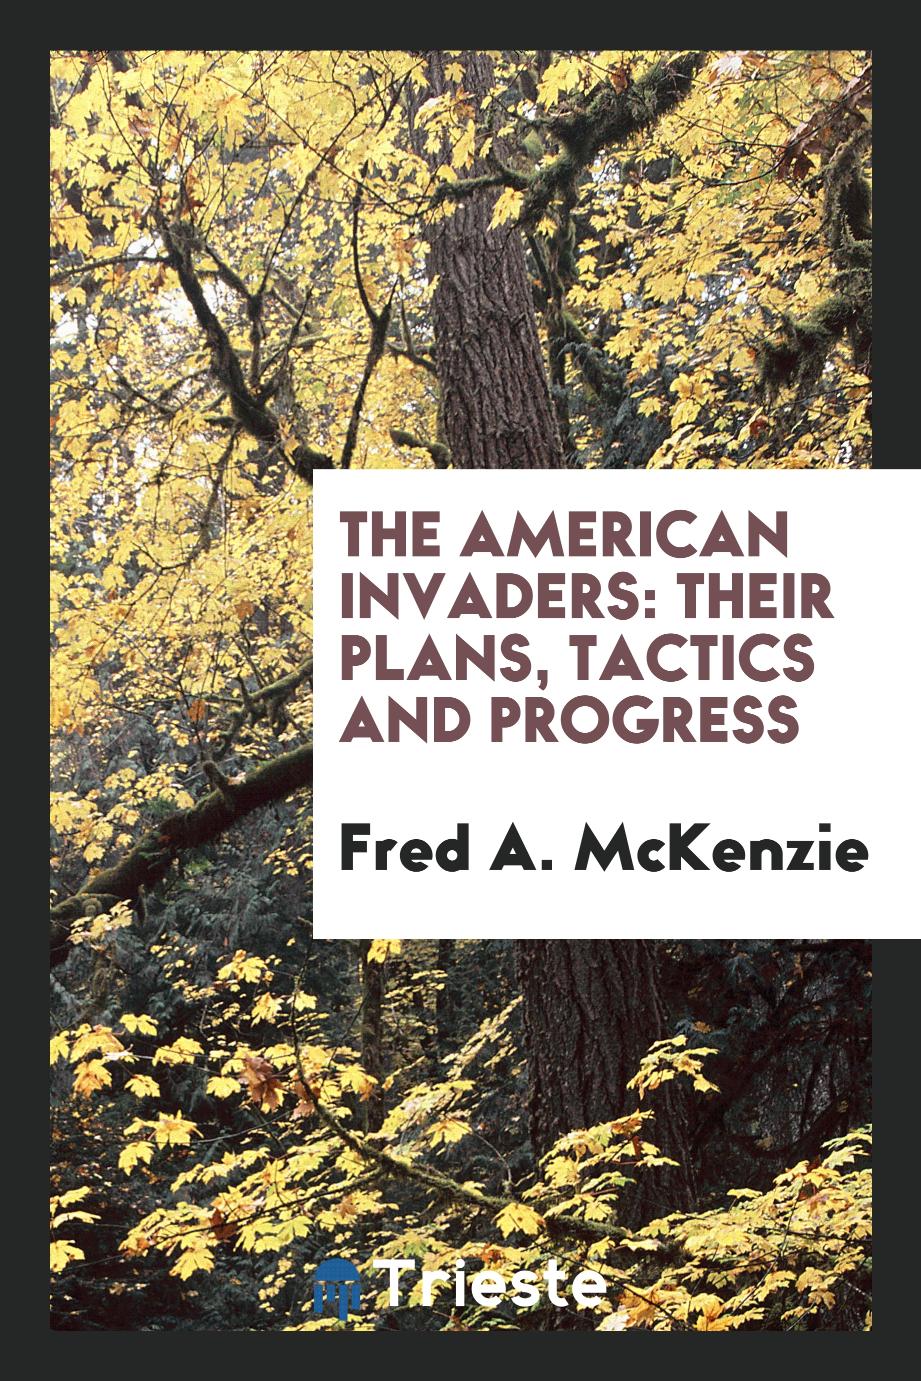 The American Invaders: Their Plans, Tactics and Progress